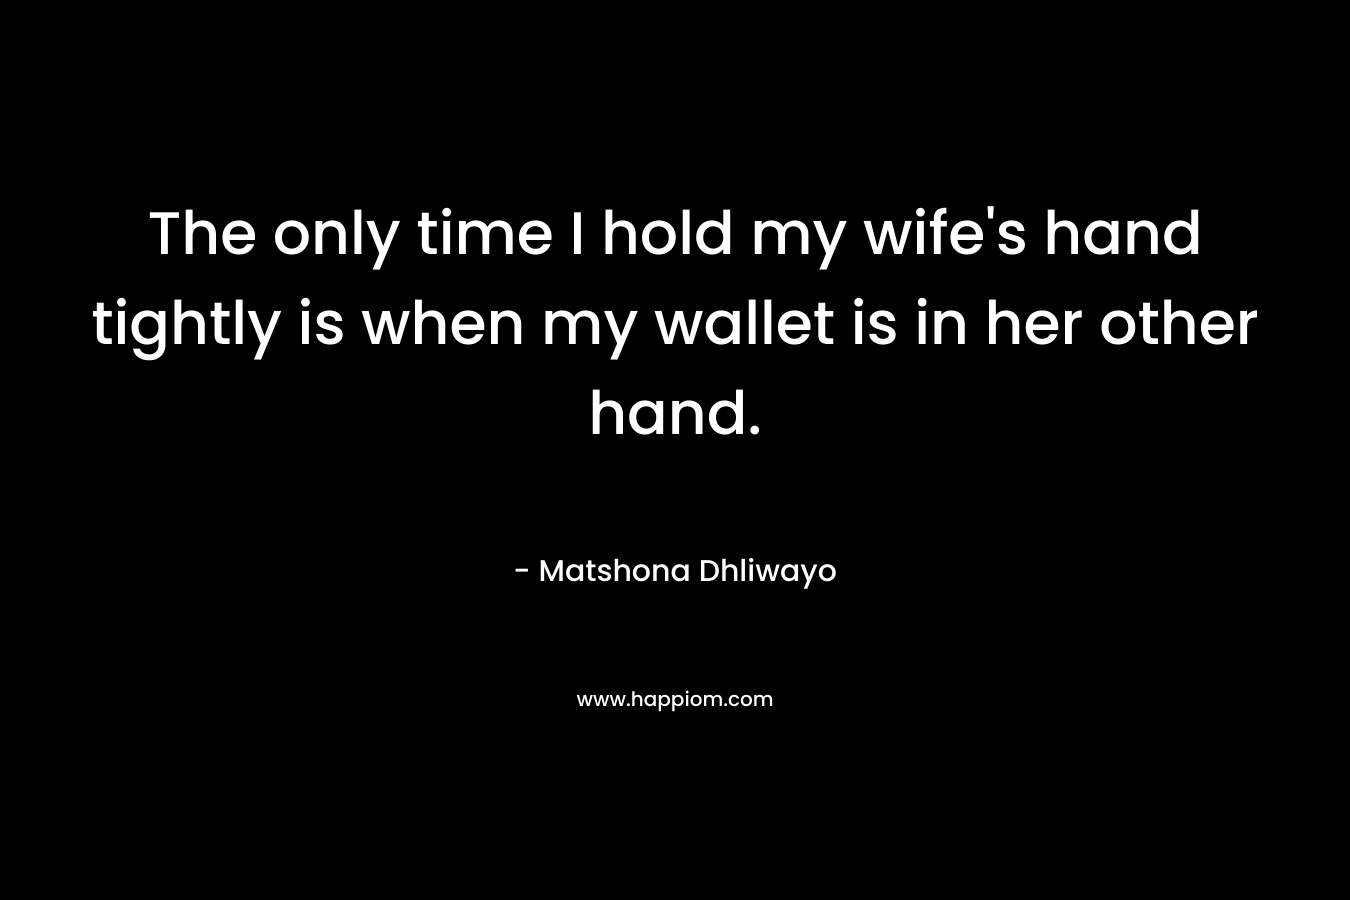 The only time I hold my wife's hand tightly is when my wallet is in her other hand.